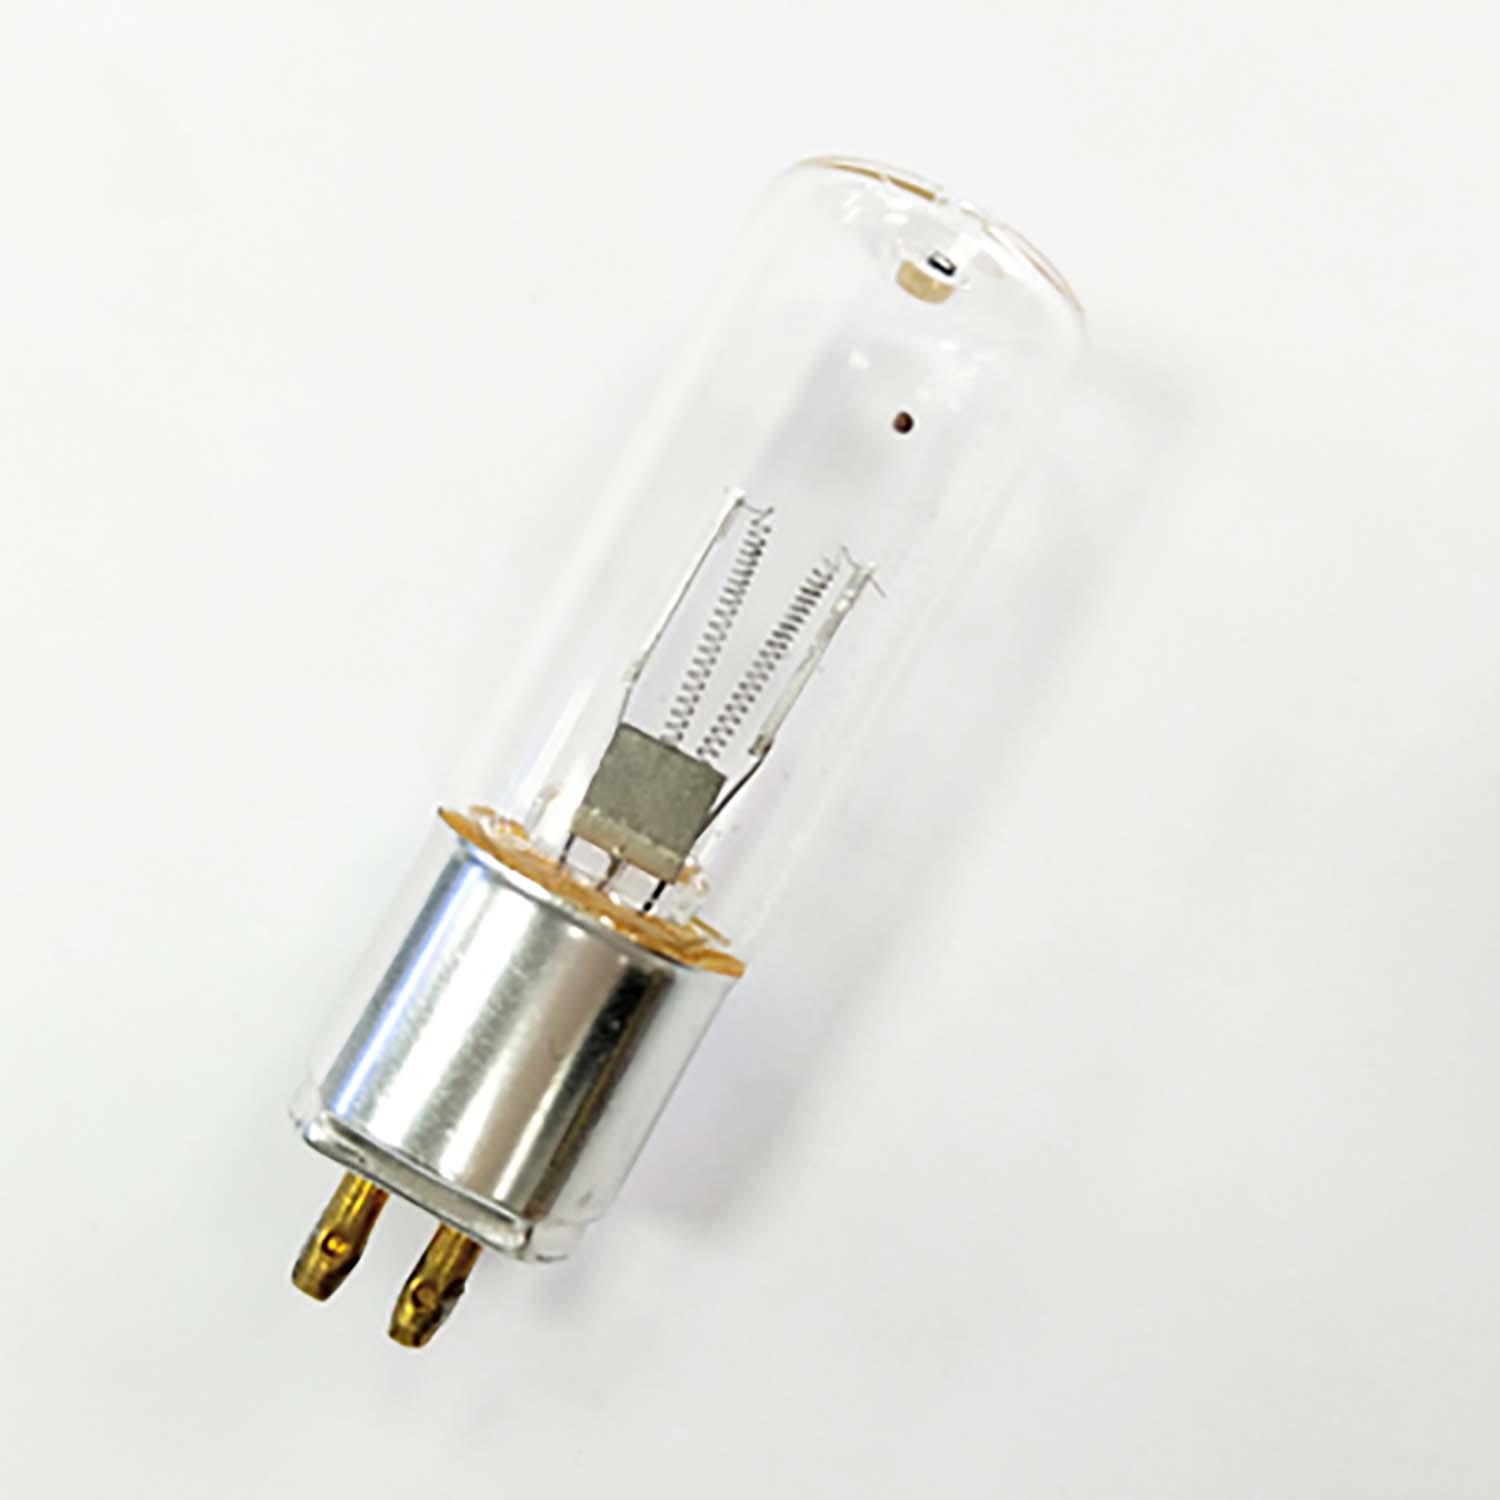 LiangYueLiang uvc ultraviolet germicidal lamp bulbs for underground water recycling-1